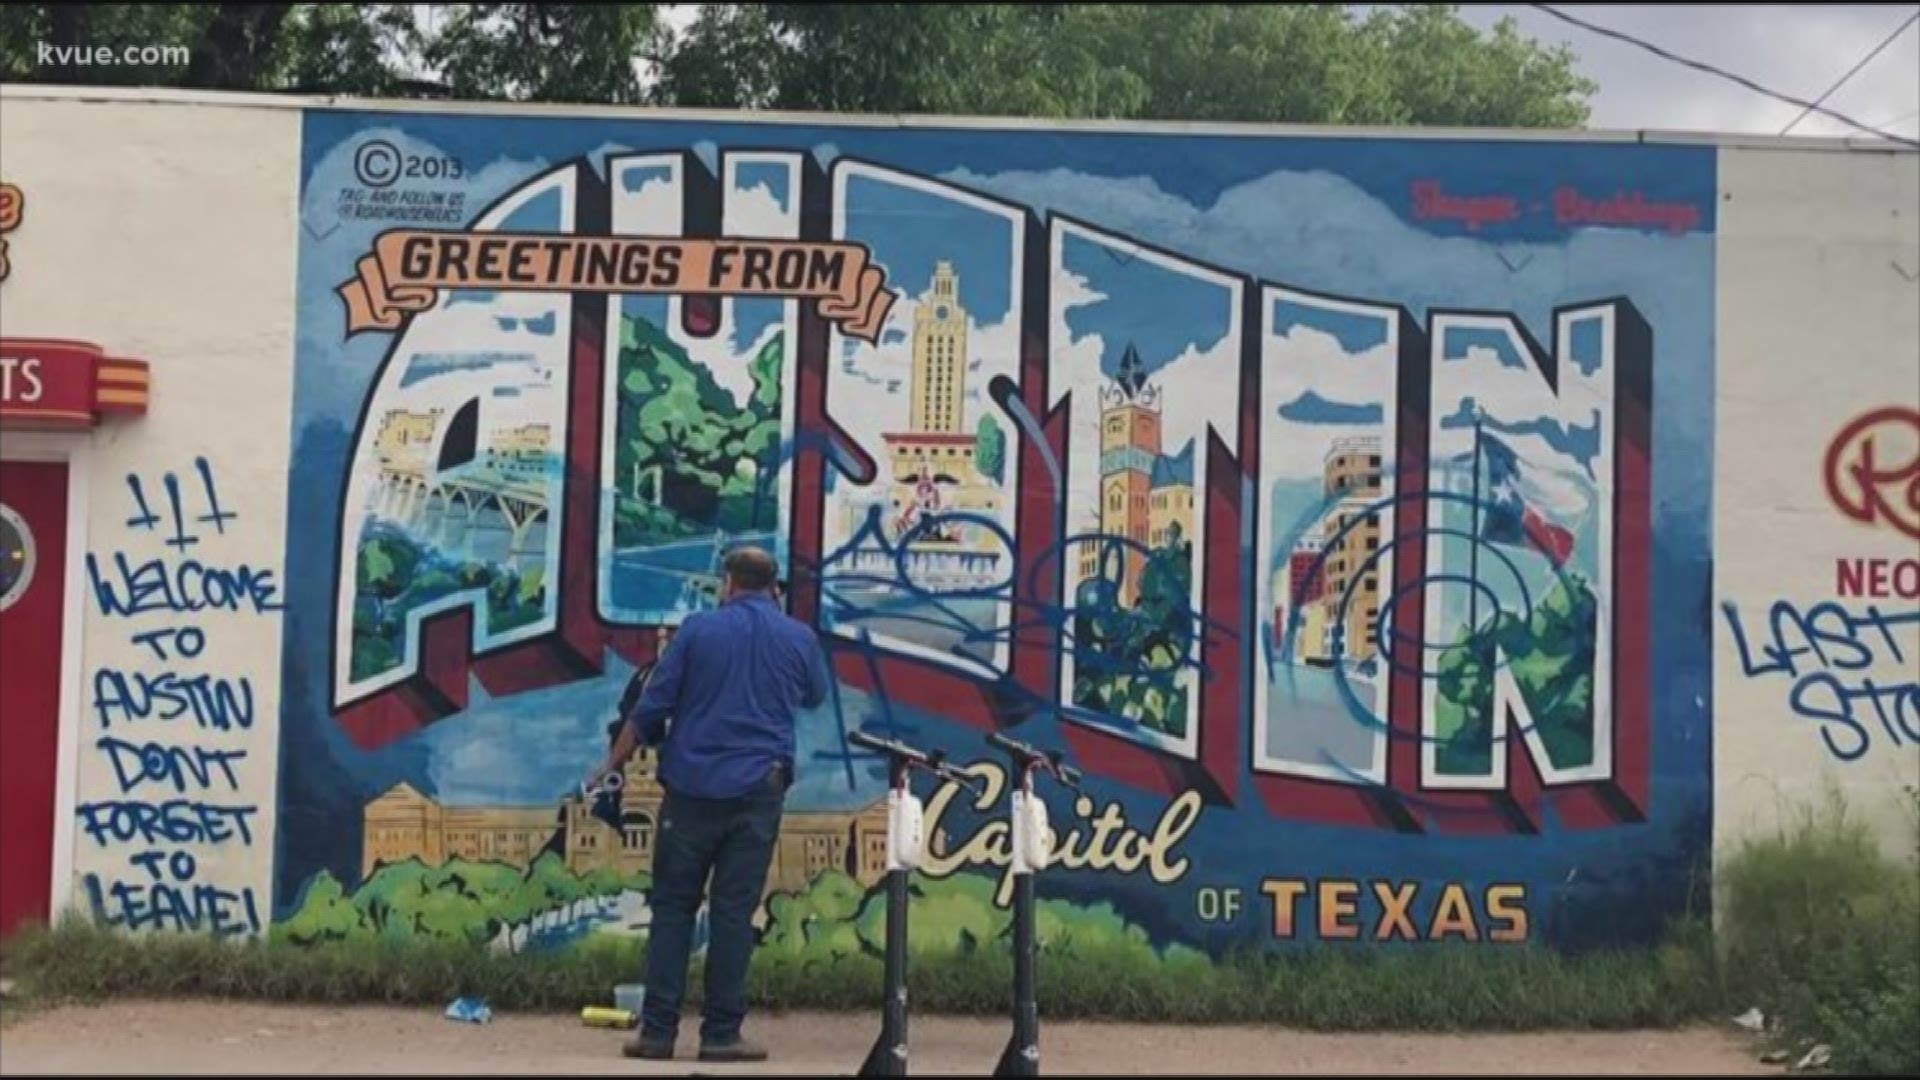 Part of the graffiti read, "Welcome to Austin, don't forget to leave."